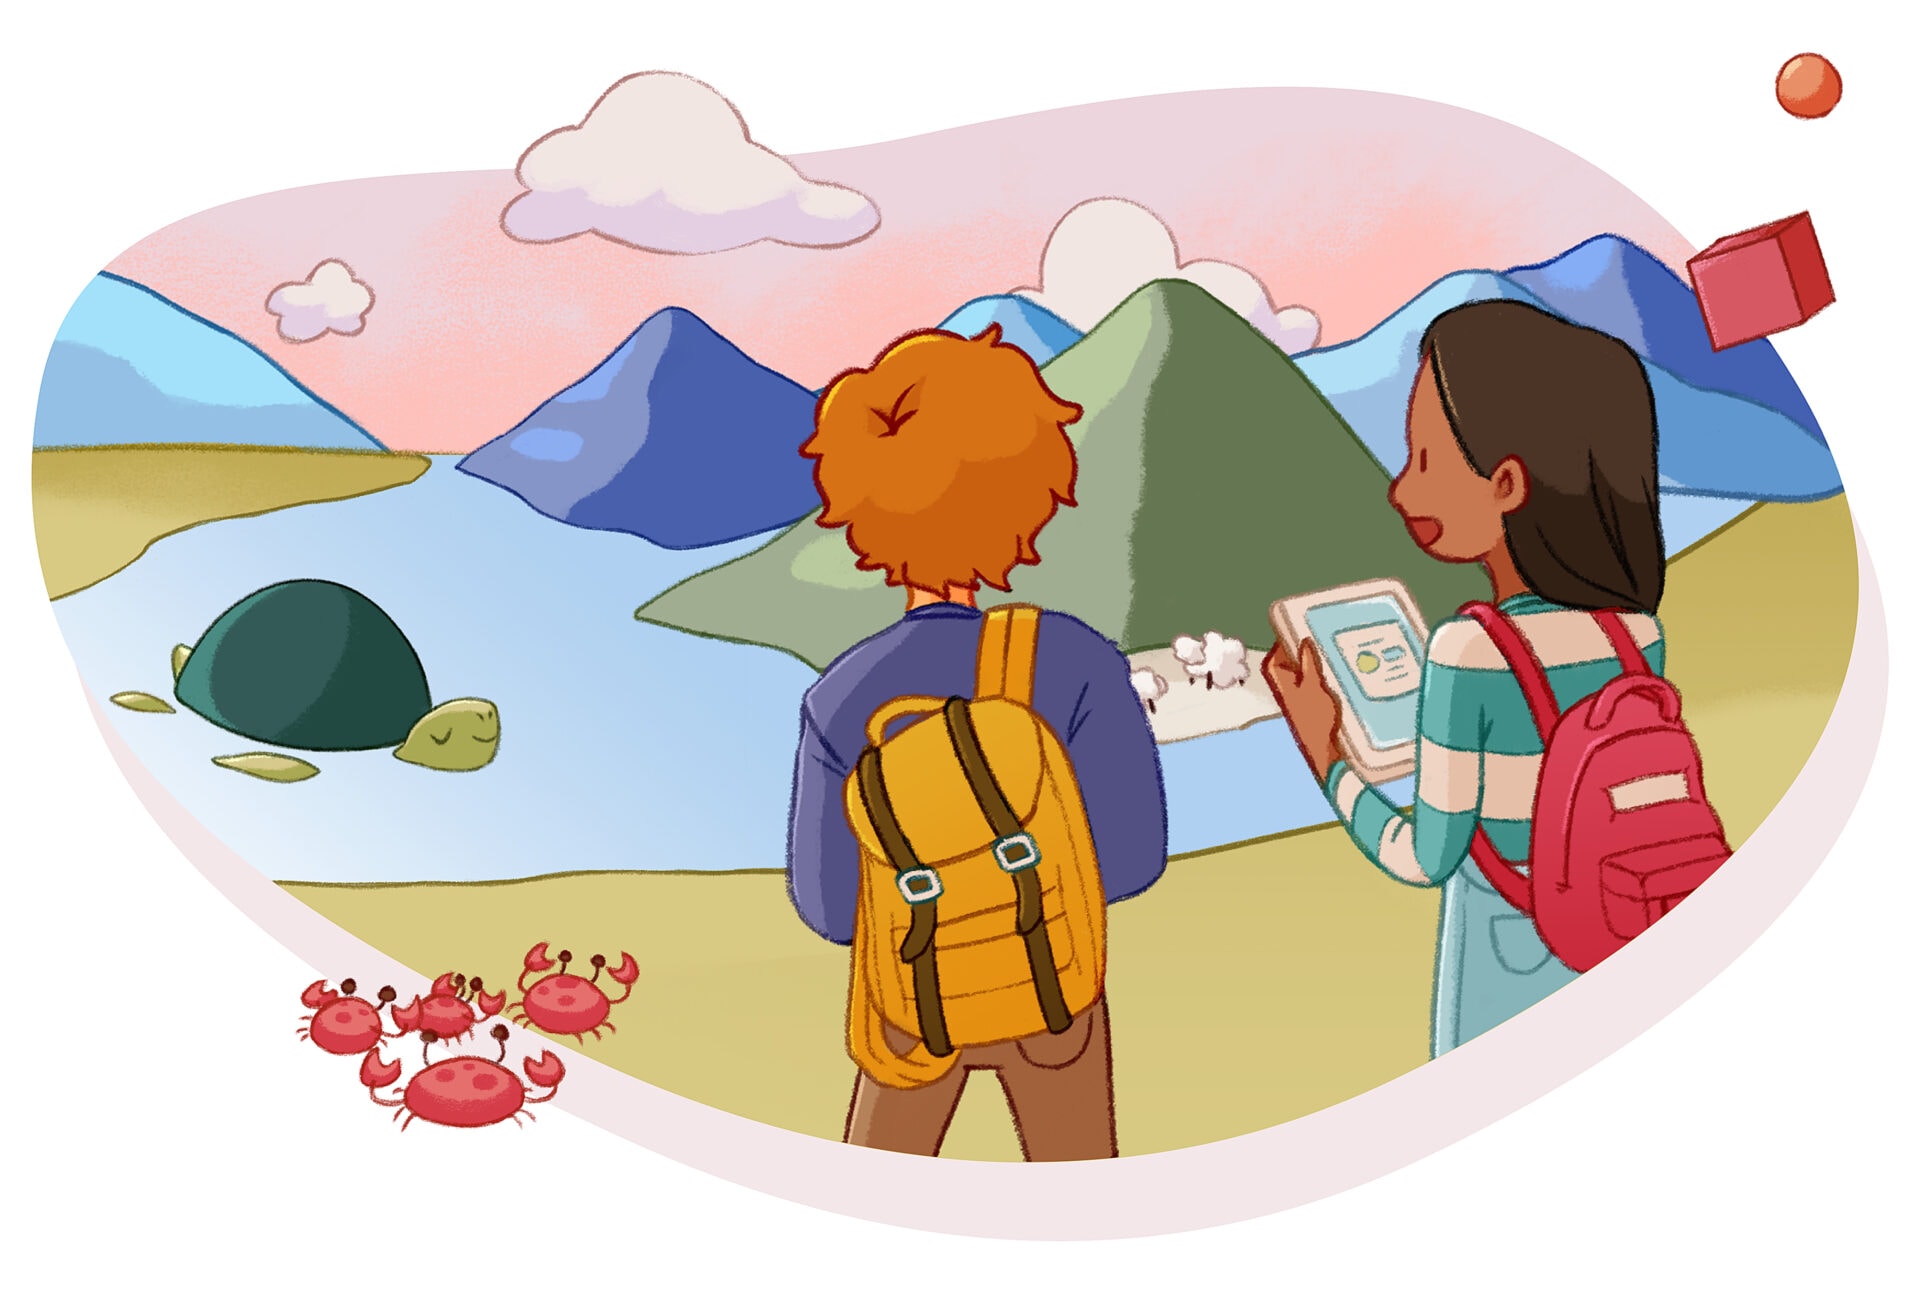 Two hikers with backpacks consulting a map by a mountain lake, with crabs and a colorful landscape in the background as part of an 